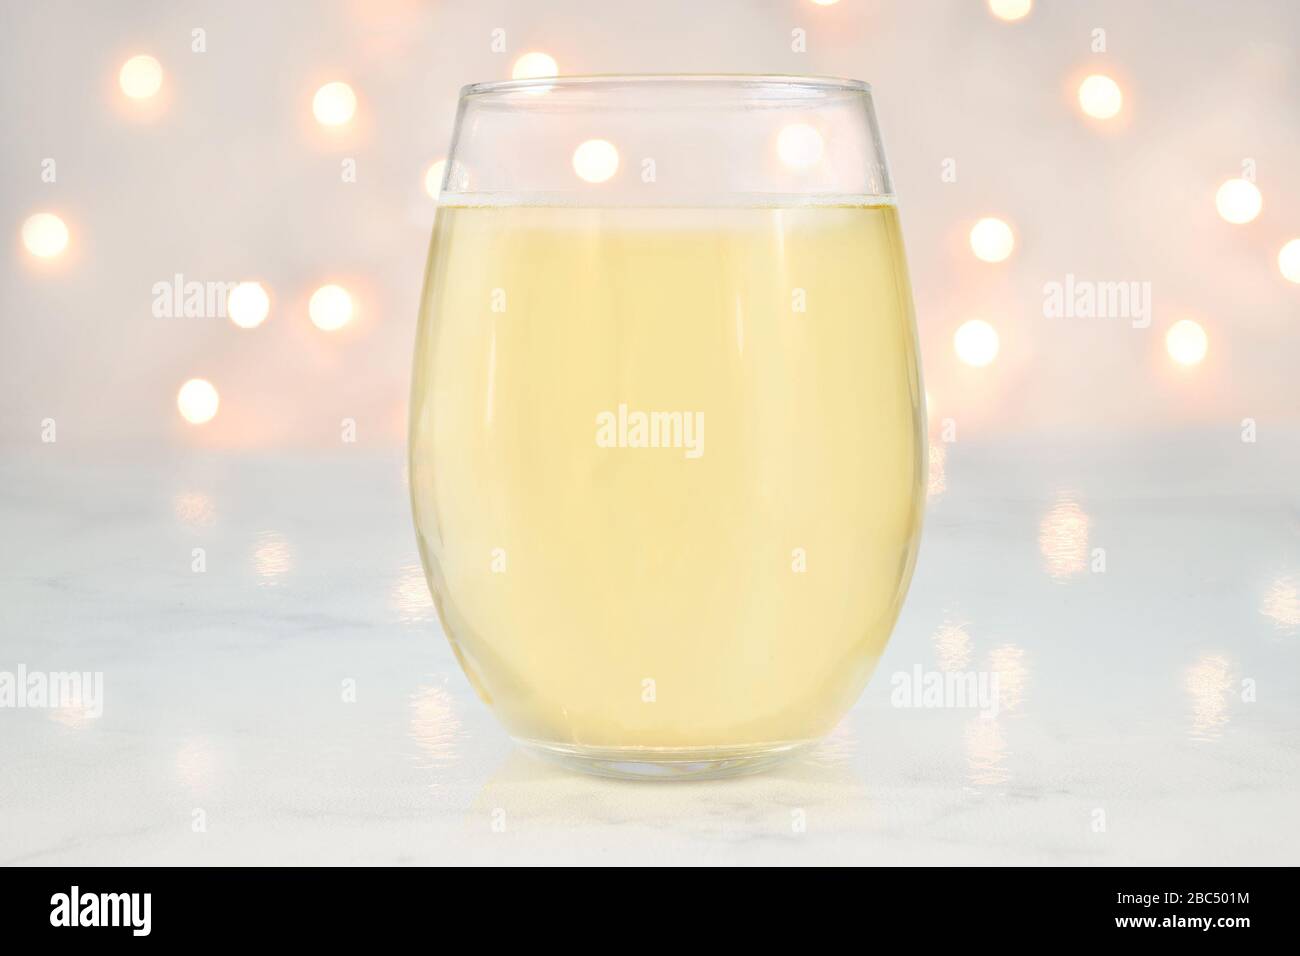 No Stem Wineglass mockup featuring a stemless wine glass filled with white wine. White lights glow romantically in the background. Stock Photo